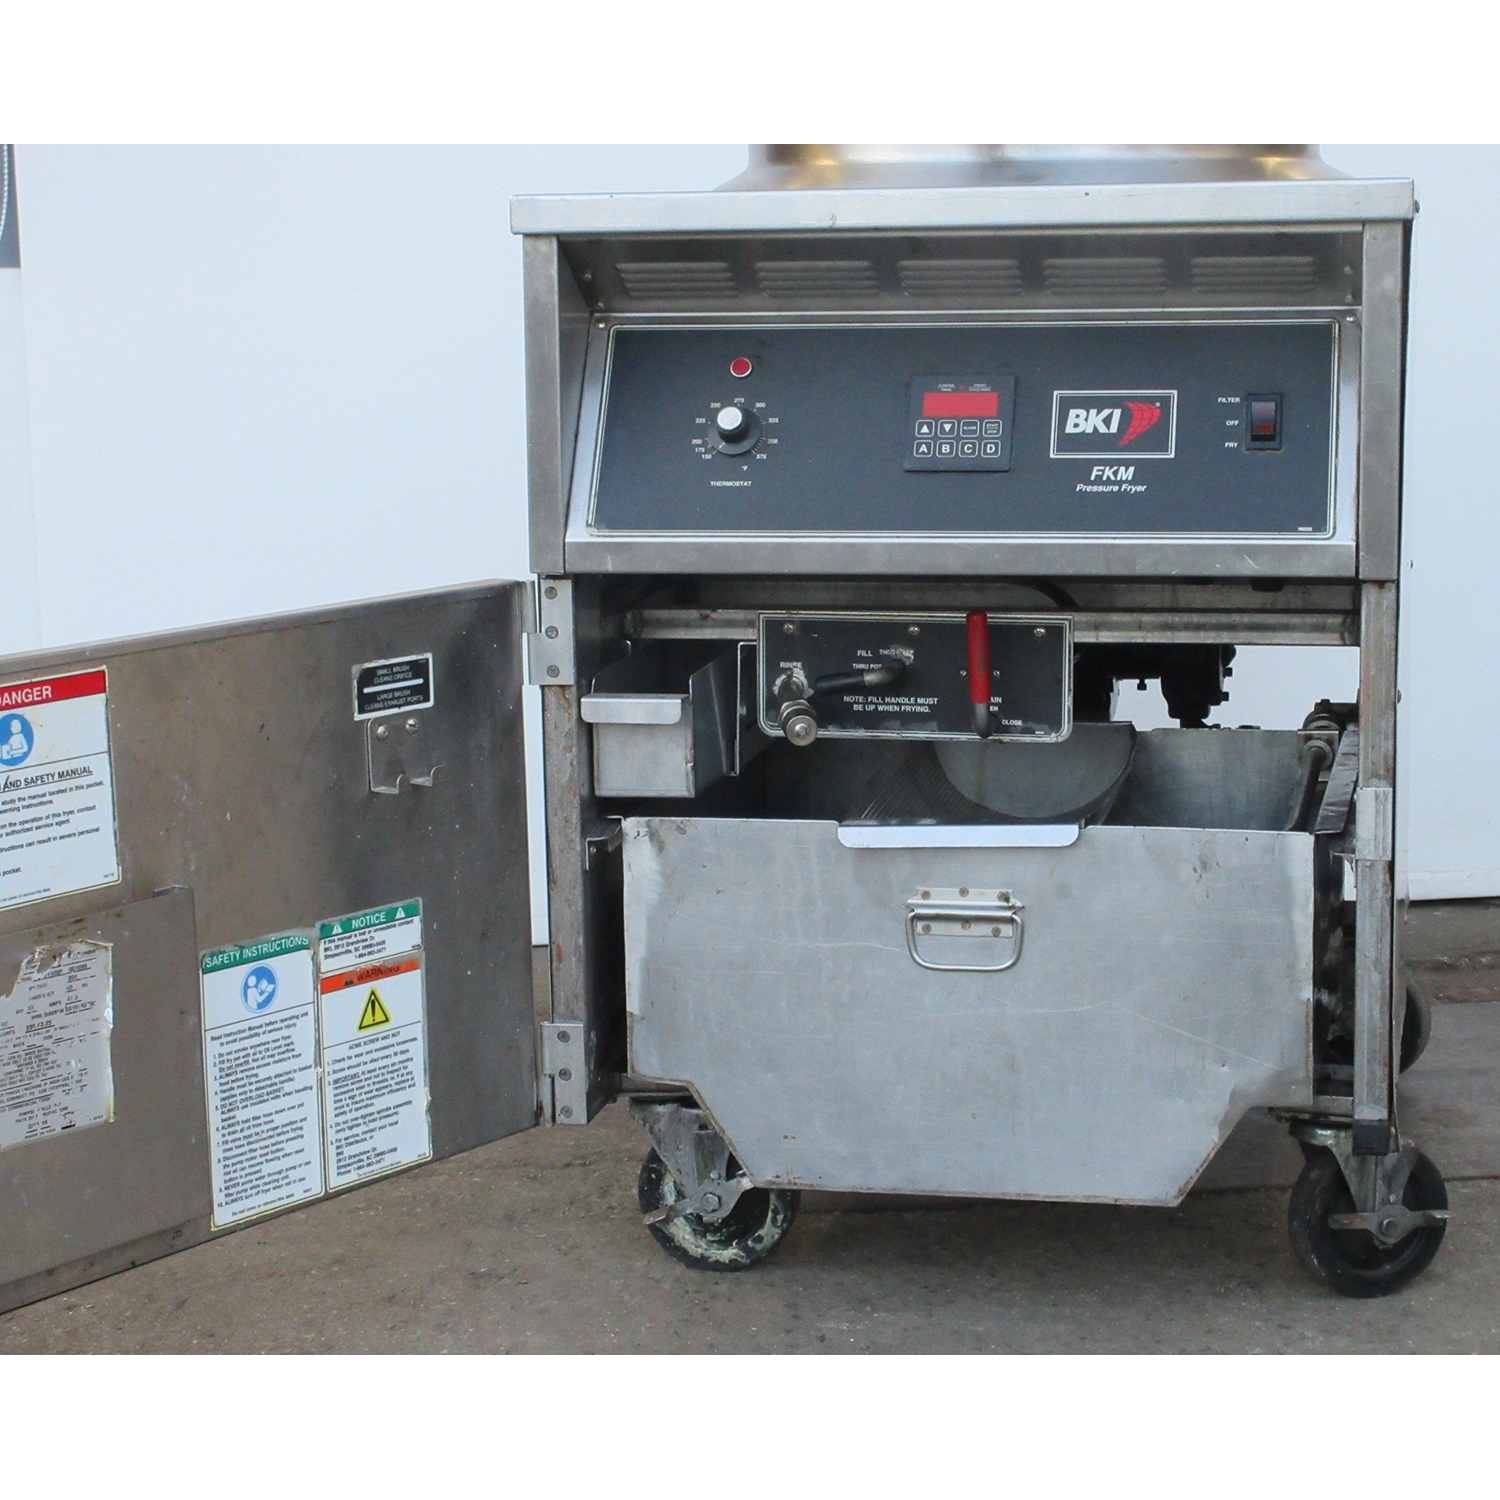 BKI FKM-F Electric Pressure Fryer, With Filtration, Used Excellent Condition image 4